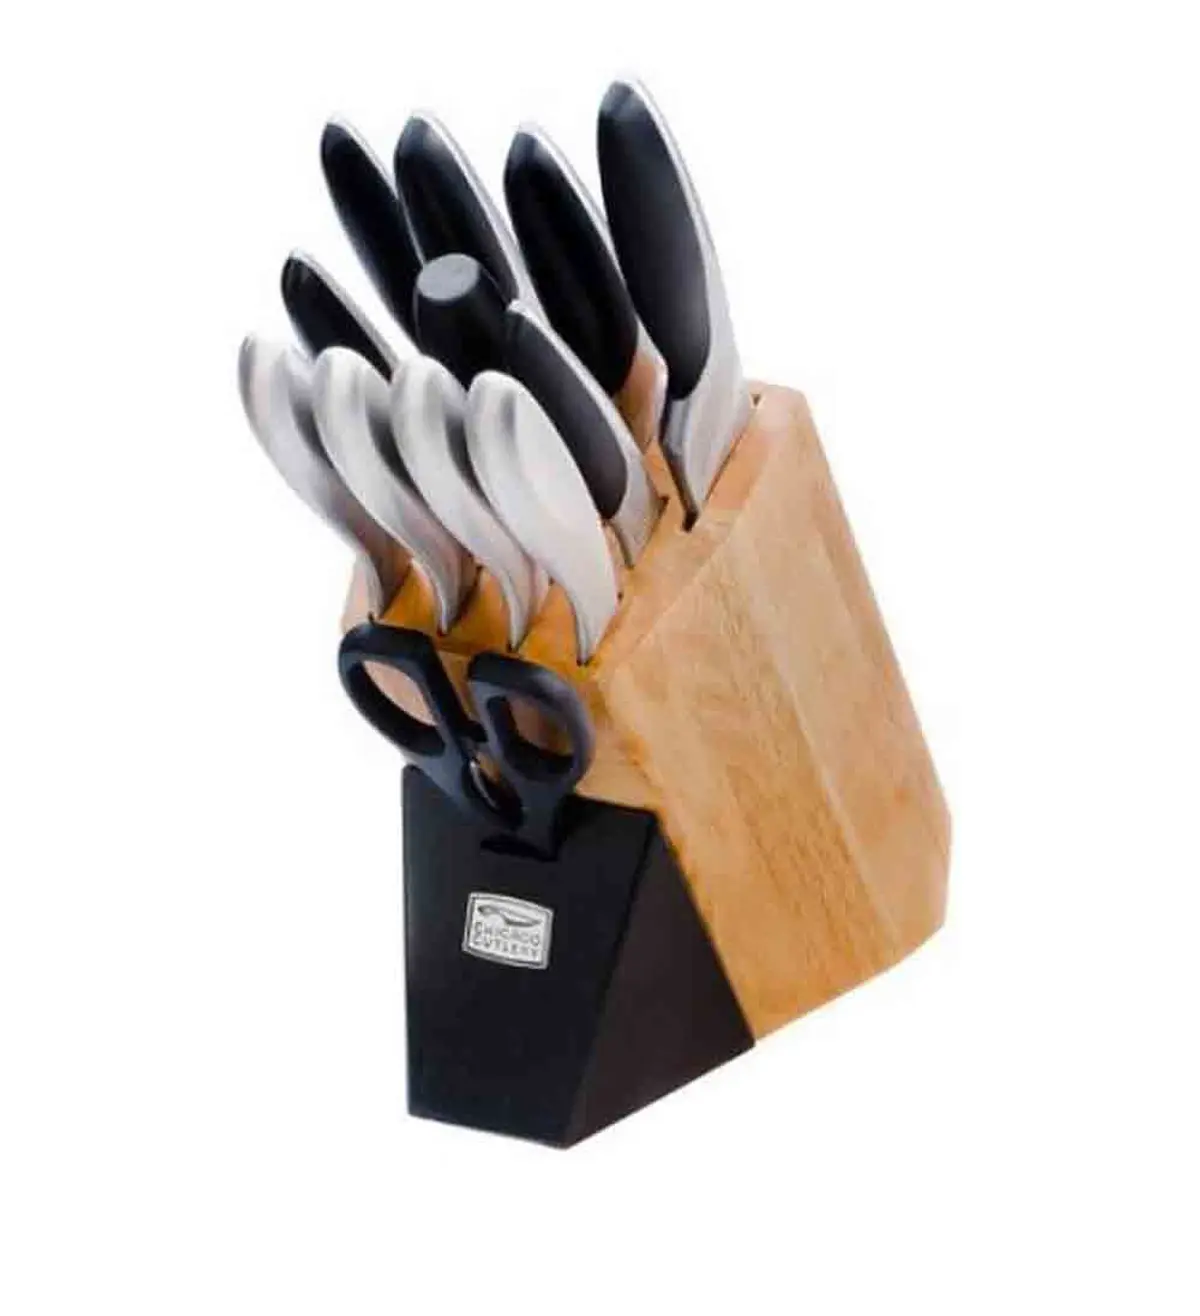 Chicago Cutlery 13 Piece Knife Block Set Review